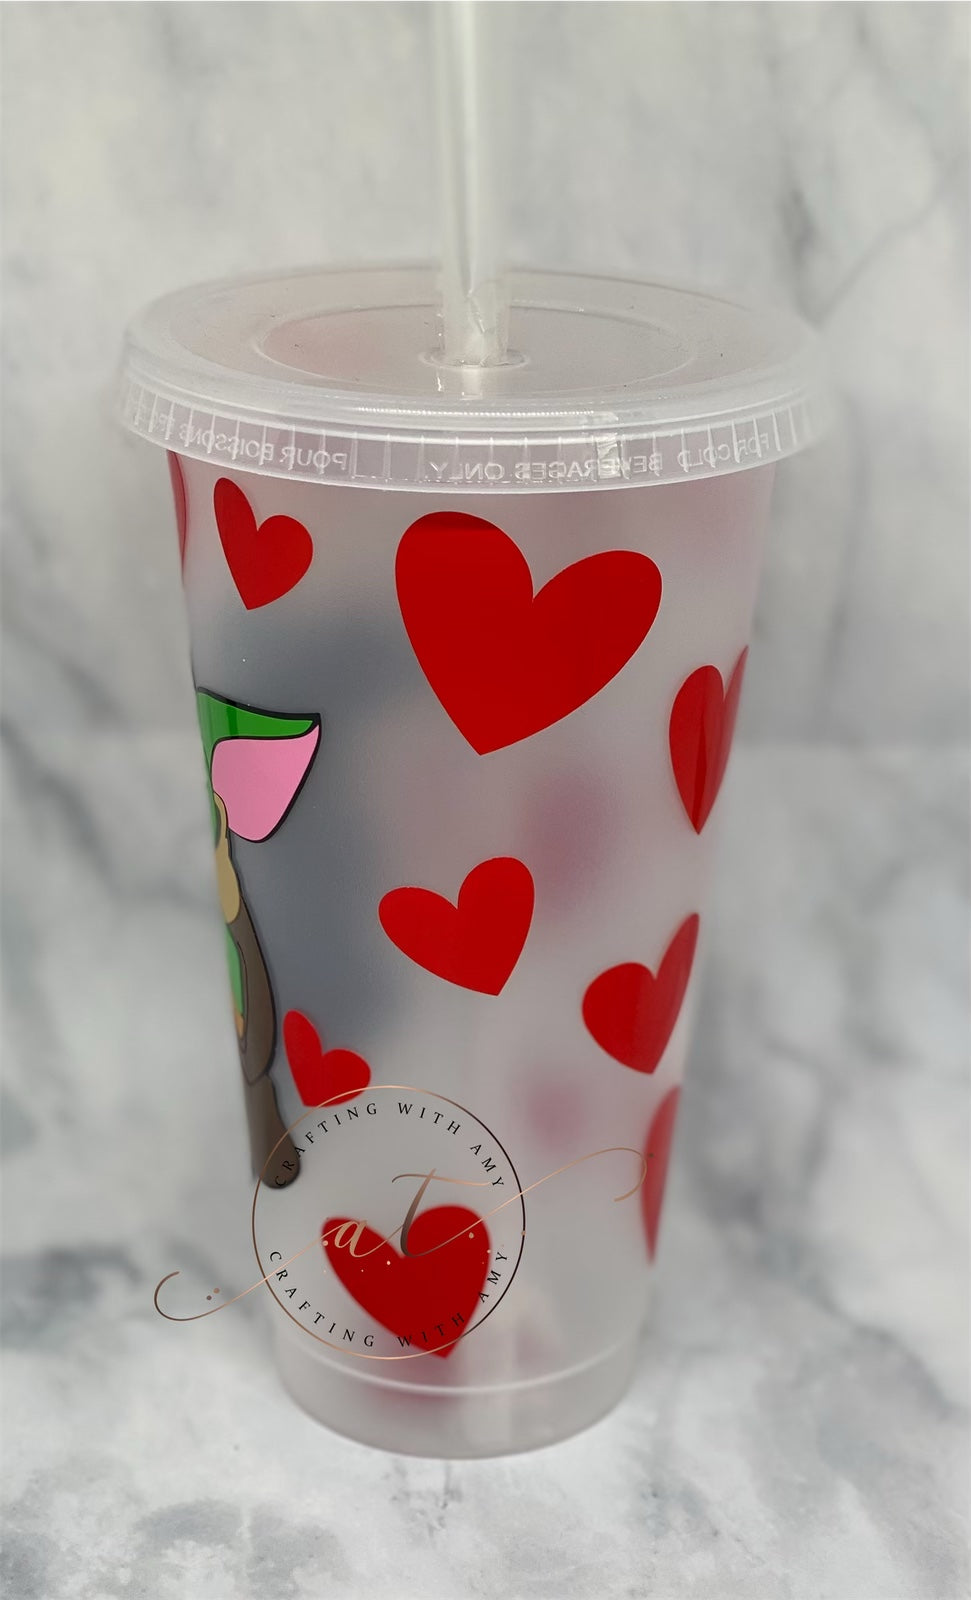 Baby Yoda Heart Valentine’s cold cup, col cup, Valentine’s Day, yoda,baby yoga freeshipping - CraftingwithAmy